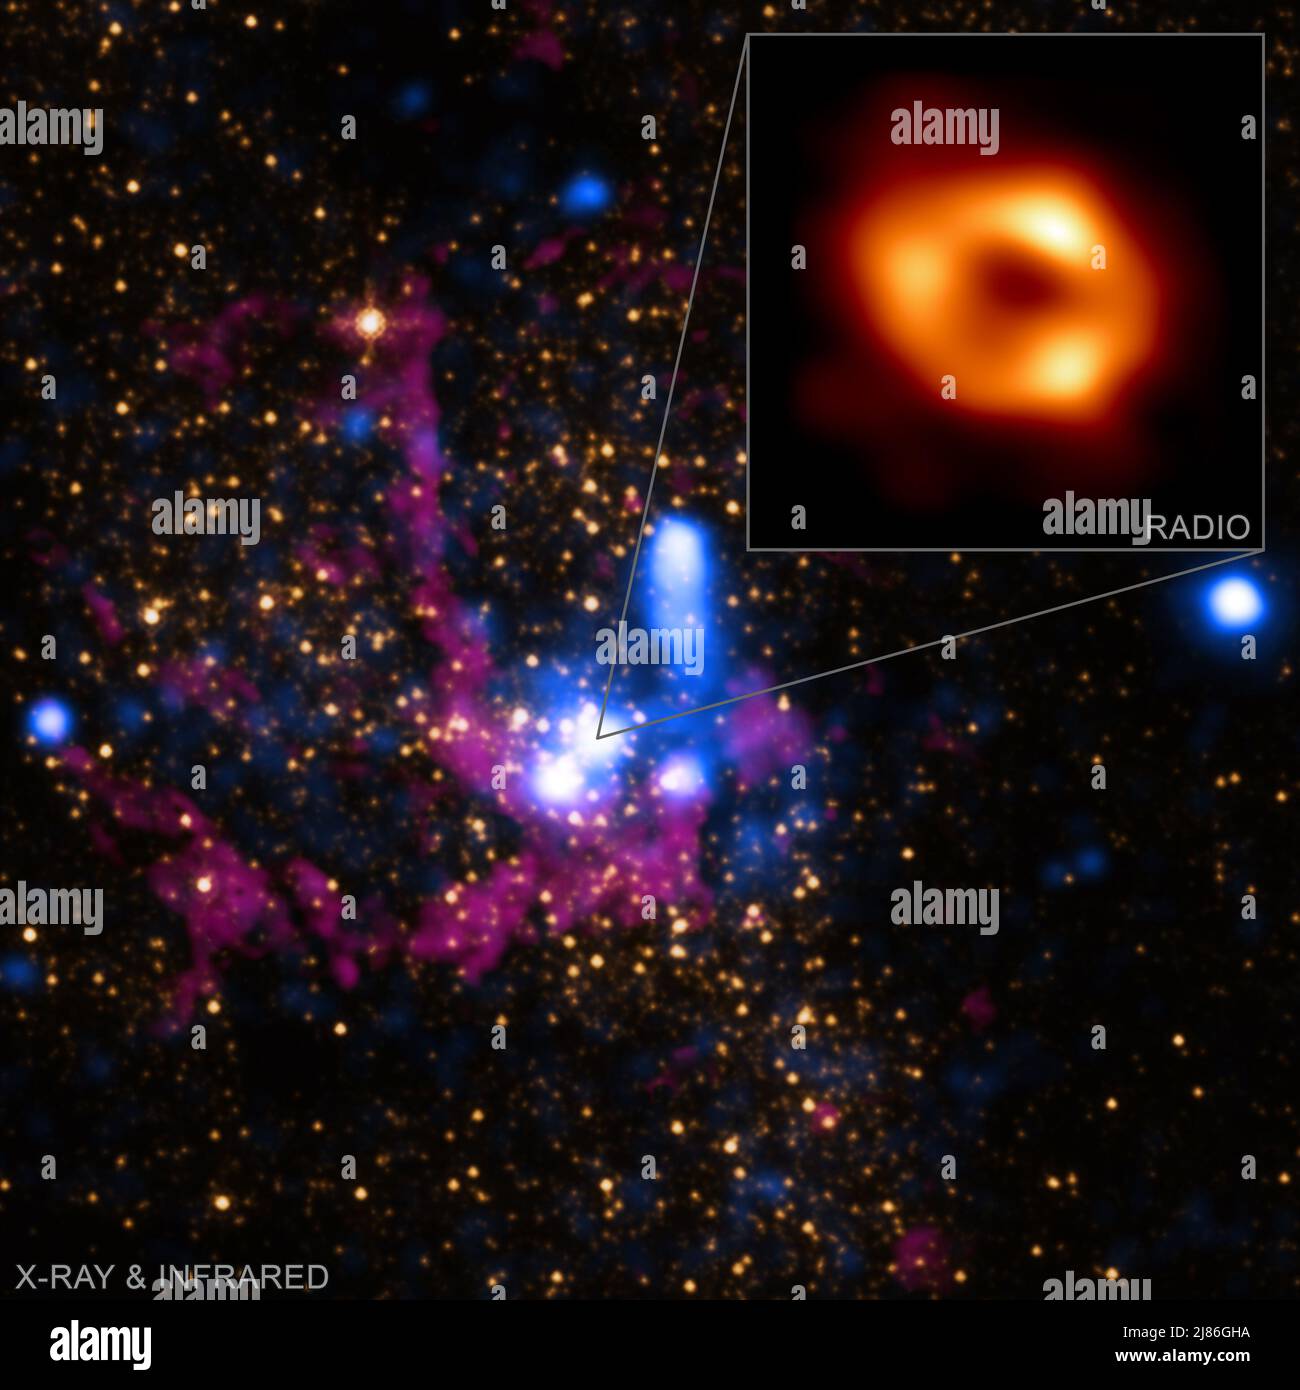 The main panel of this graphic contains X-ray data from Chandra (blue) depicting hot gas that was blown away from massive stars near the black hole. Two images of infrared light at different wavelengths from NASA's Hubble Space Telescope show stars (orange) and cool gas (purple). These images are seven light years across at the distance of Sgr A*. A pull-out shows the new EHT image, which is only about 1.8 x 10-5 light years across (0.000018 light years, or about 10 light minutes). (Credit: X-ray: NASA/CXC/SAO; IR: NASA/HST/STScI. Inset: Radio (EHT Collaboration)) (Nasa via Sipa USA) ***Press Stock Photo